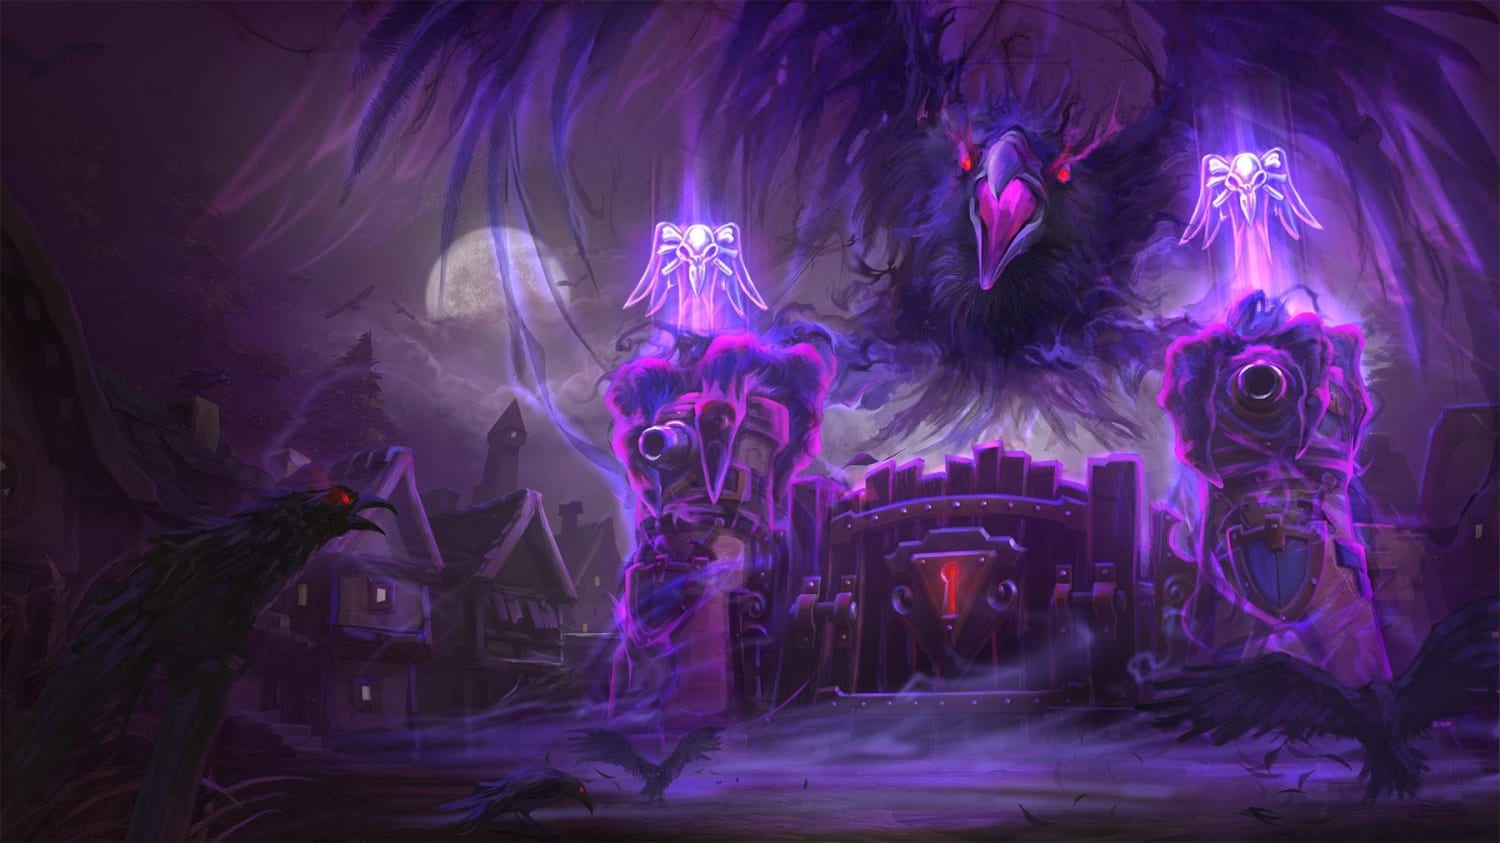 Heroes of the Storm Reveals Five Diablo 3 Characters the MOBA Will